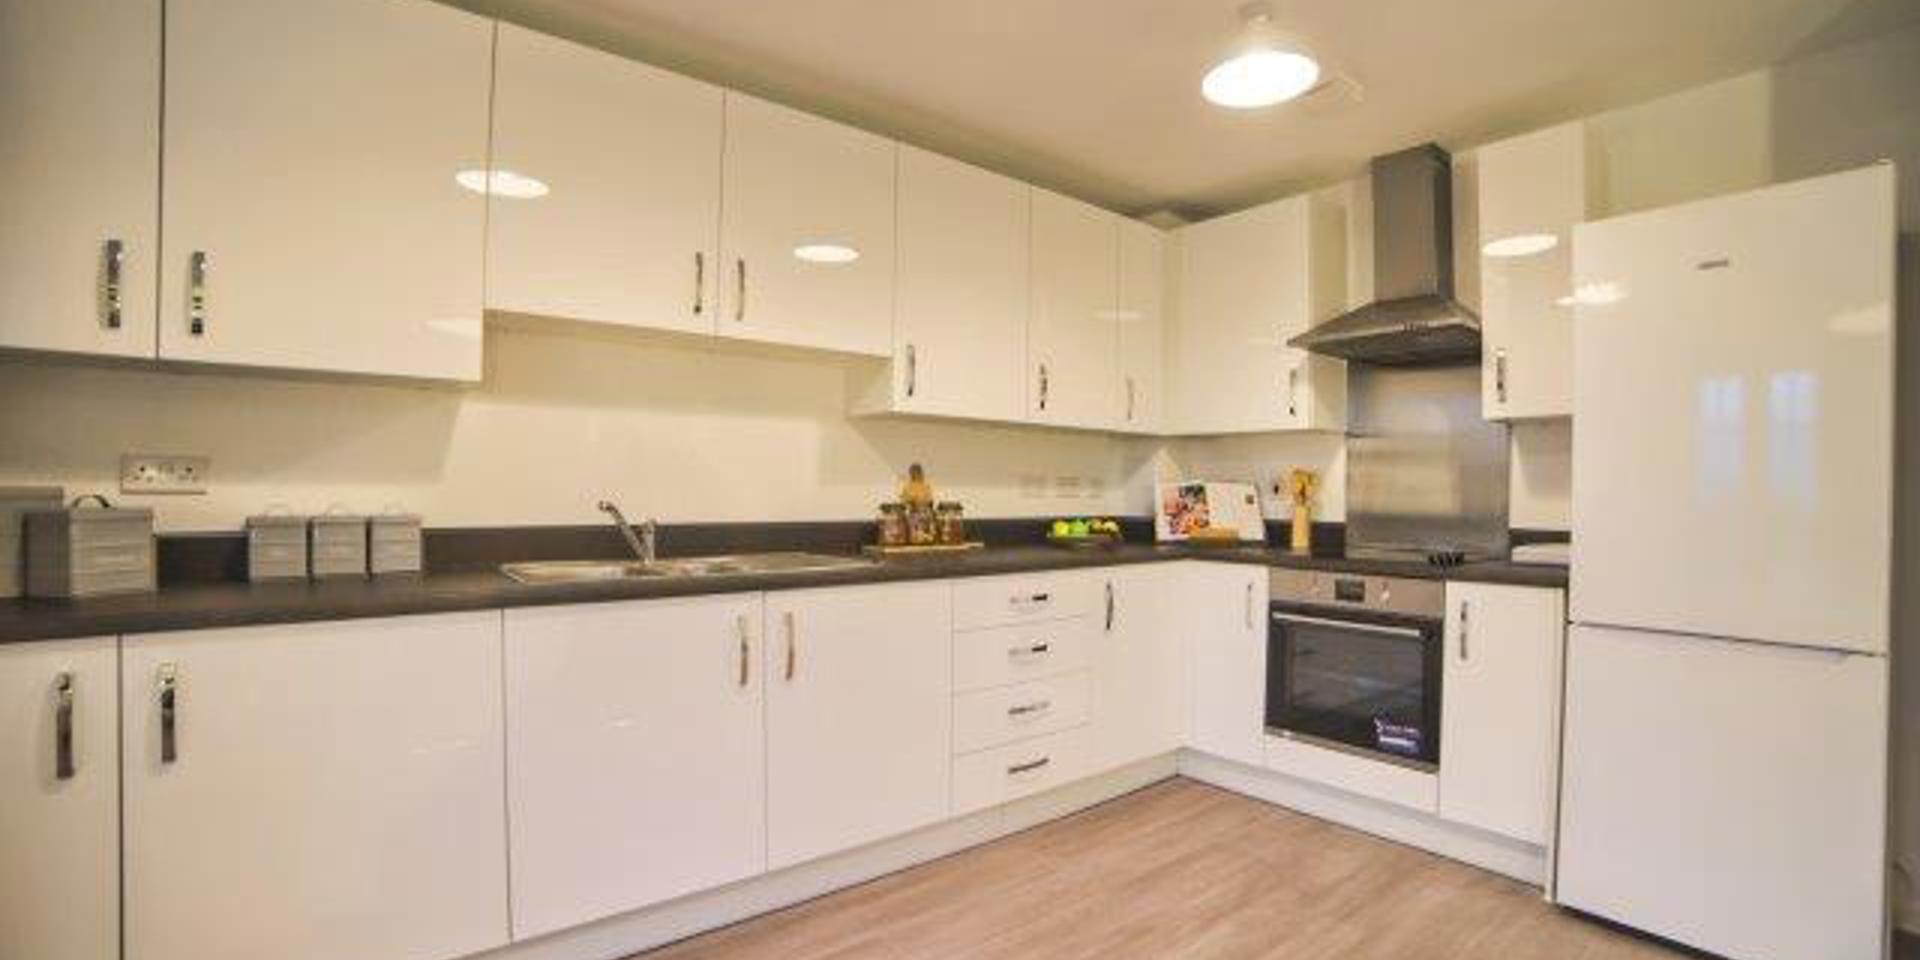 A picture of the fully fitted kitchen